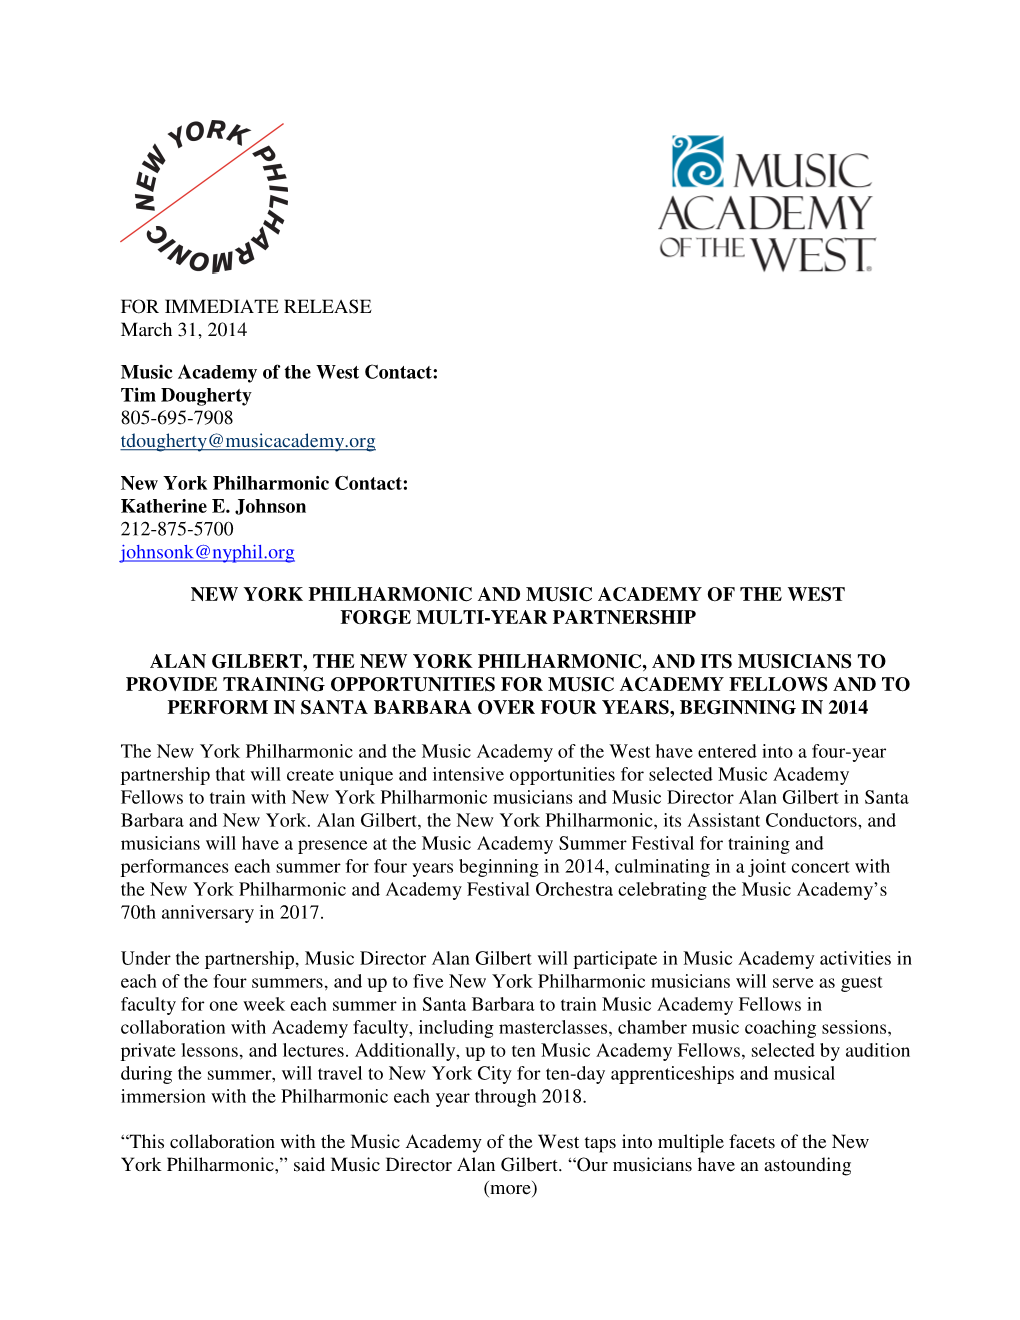 FOR IMMEDIATE RELEASE March 31, 2014 Music Academy of the West